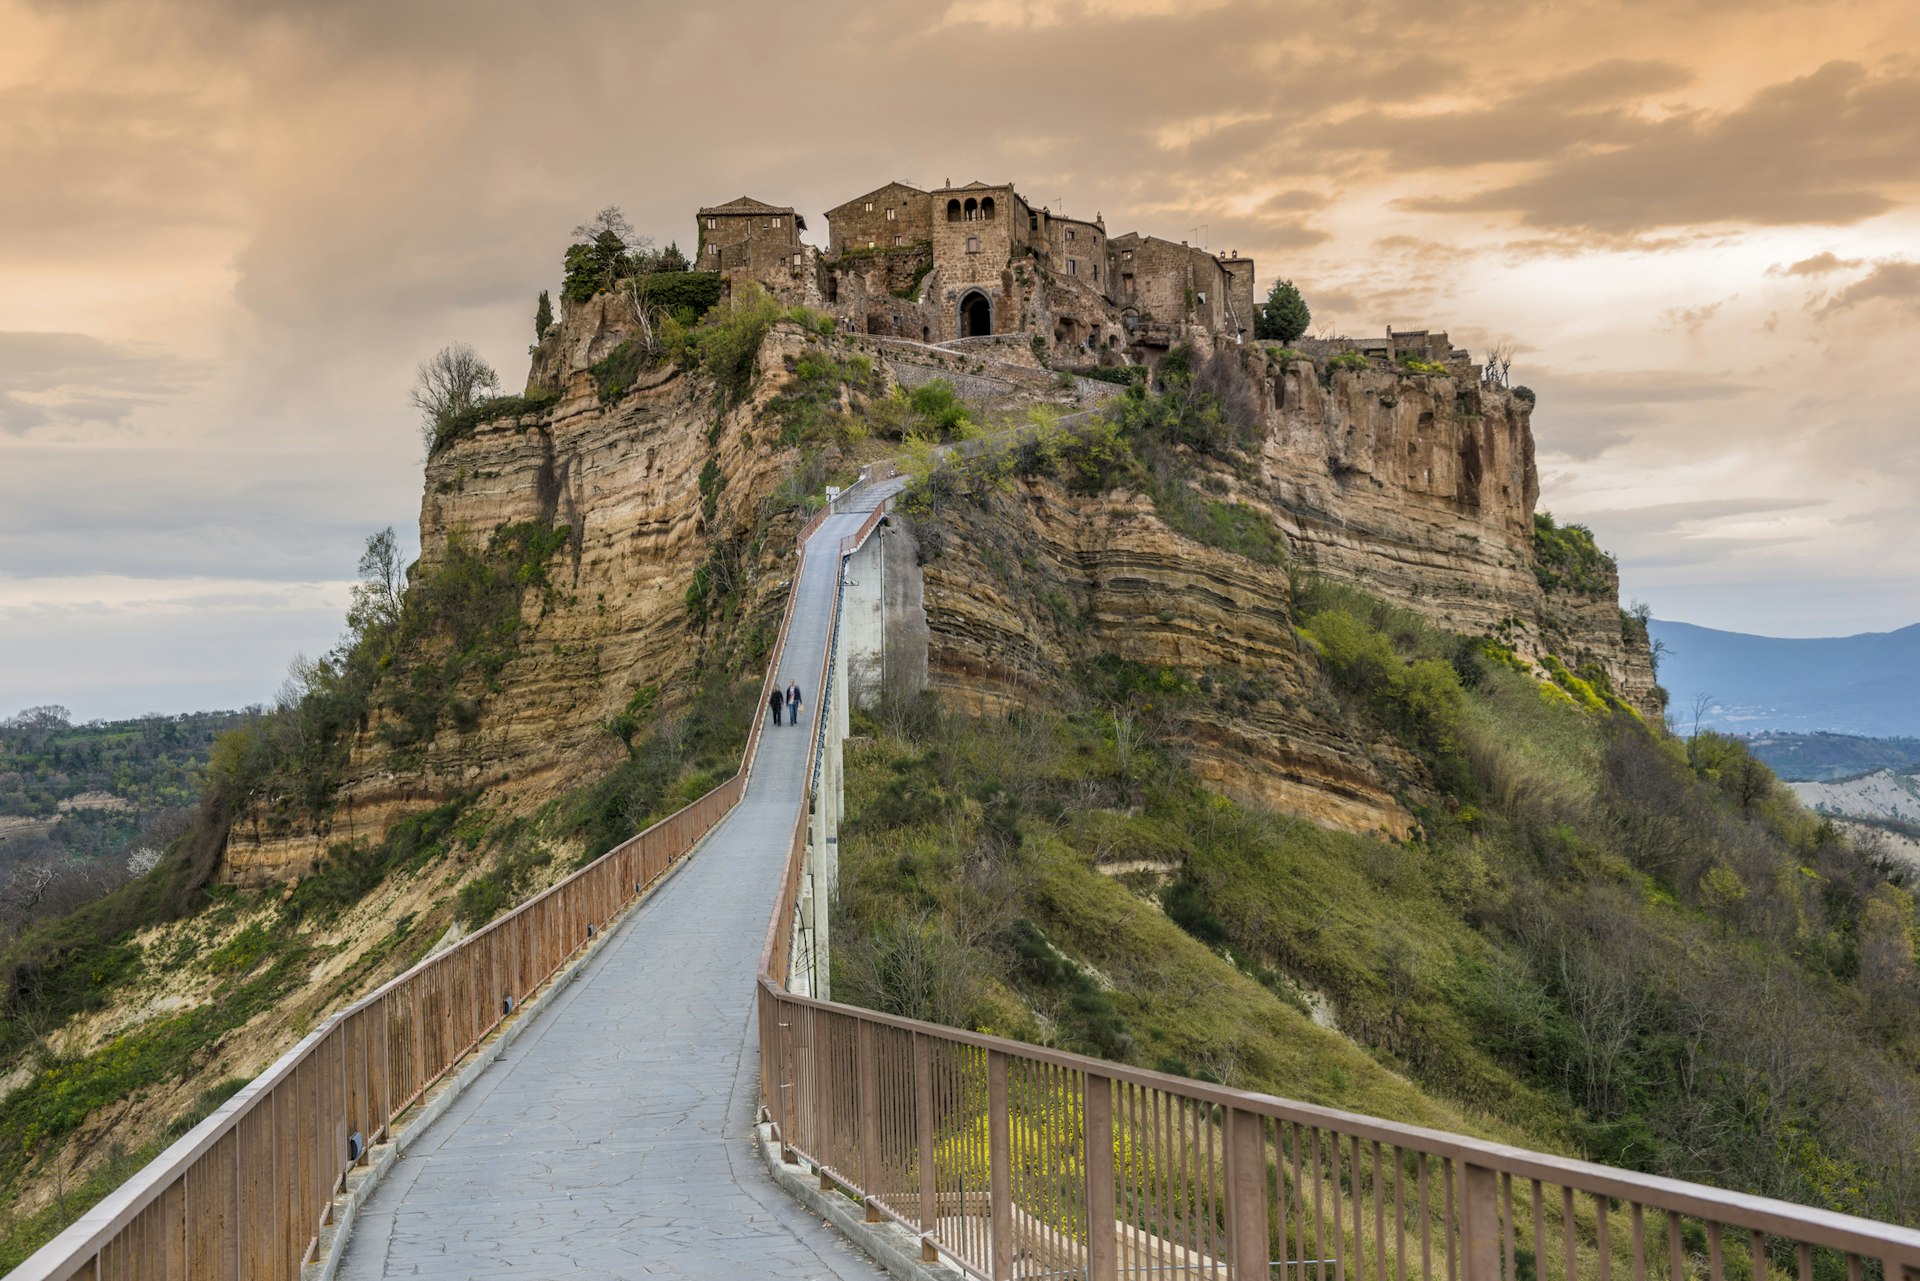 A hilltop crowned with a medieval town. Two people walk down the narrow path that leads down from the hill